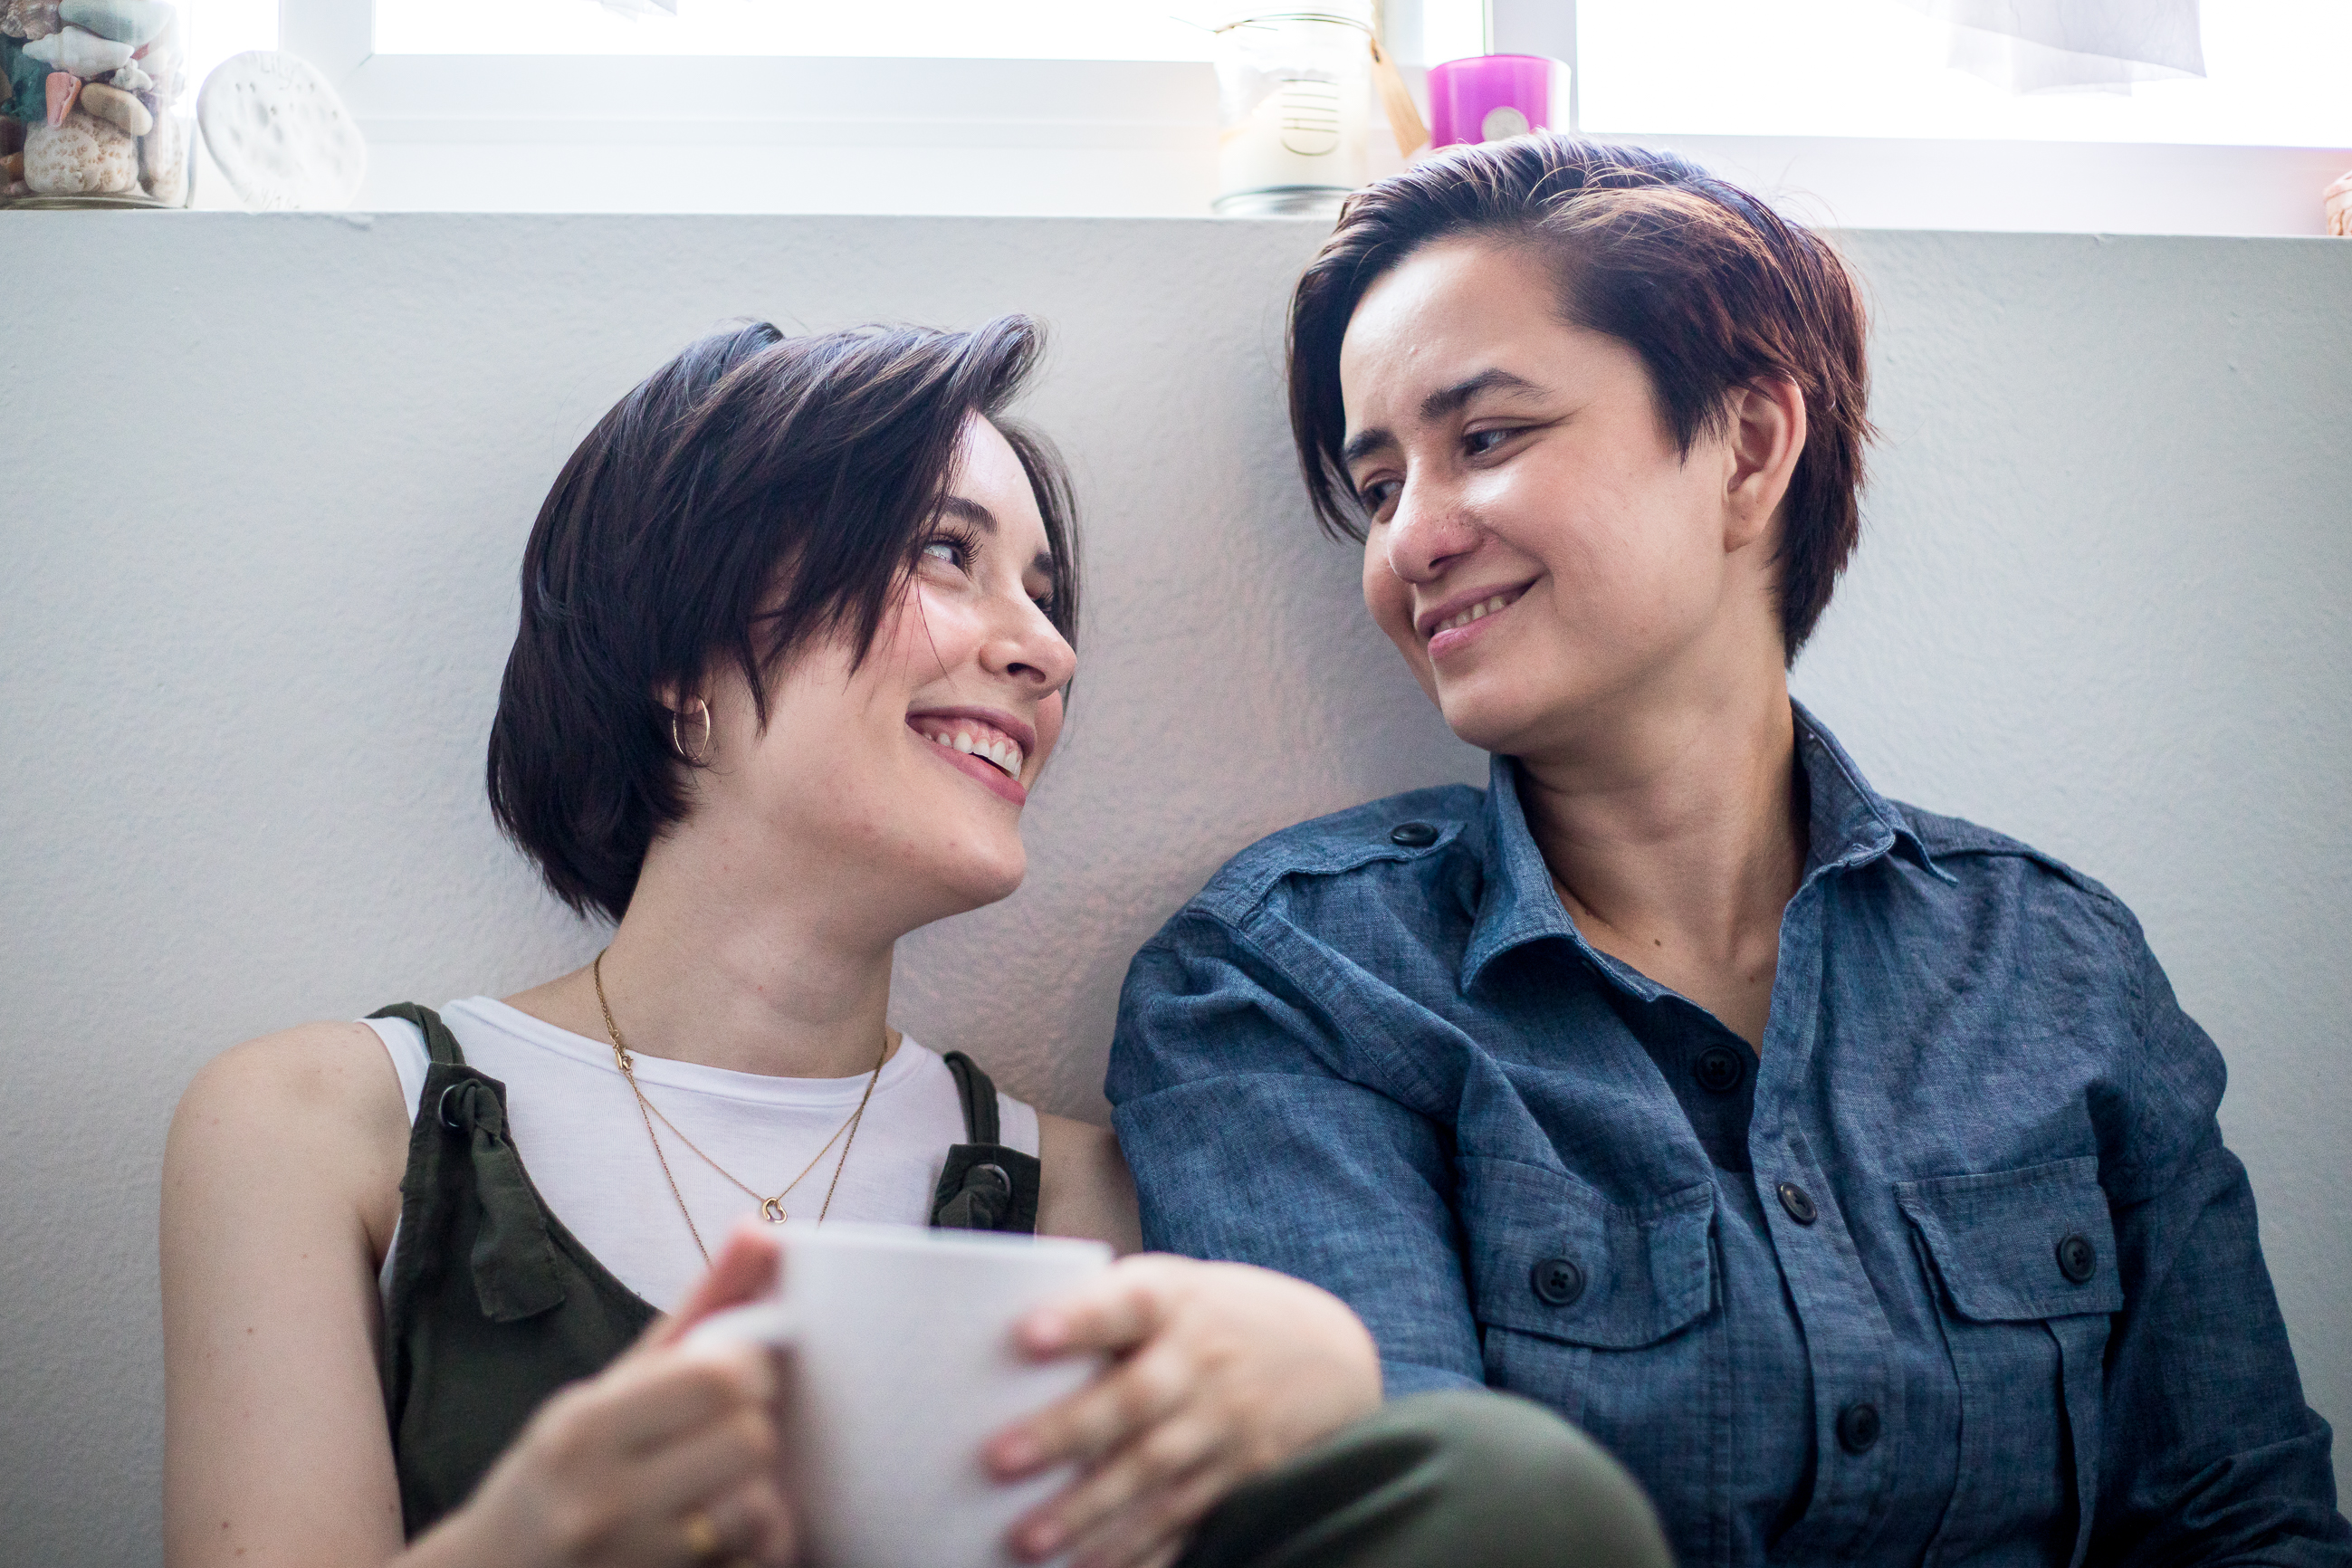 lesbian couple smiling at each other over coffee